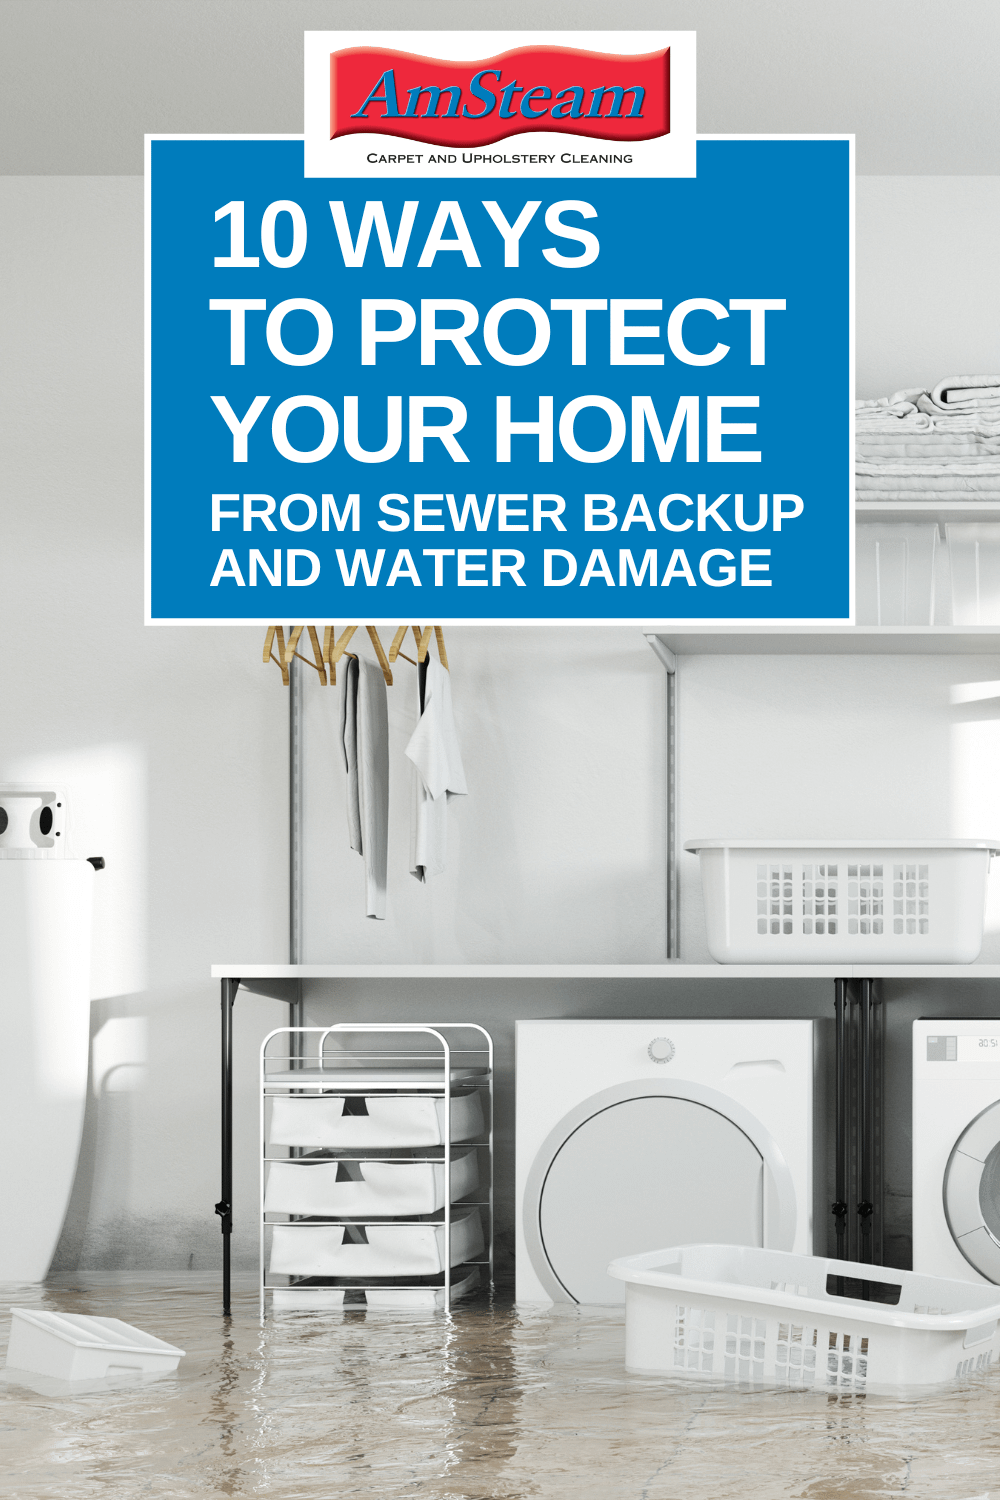 10 Ways to Protect Your Home From Sewer Backup & Water Damage